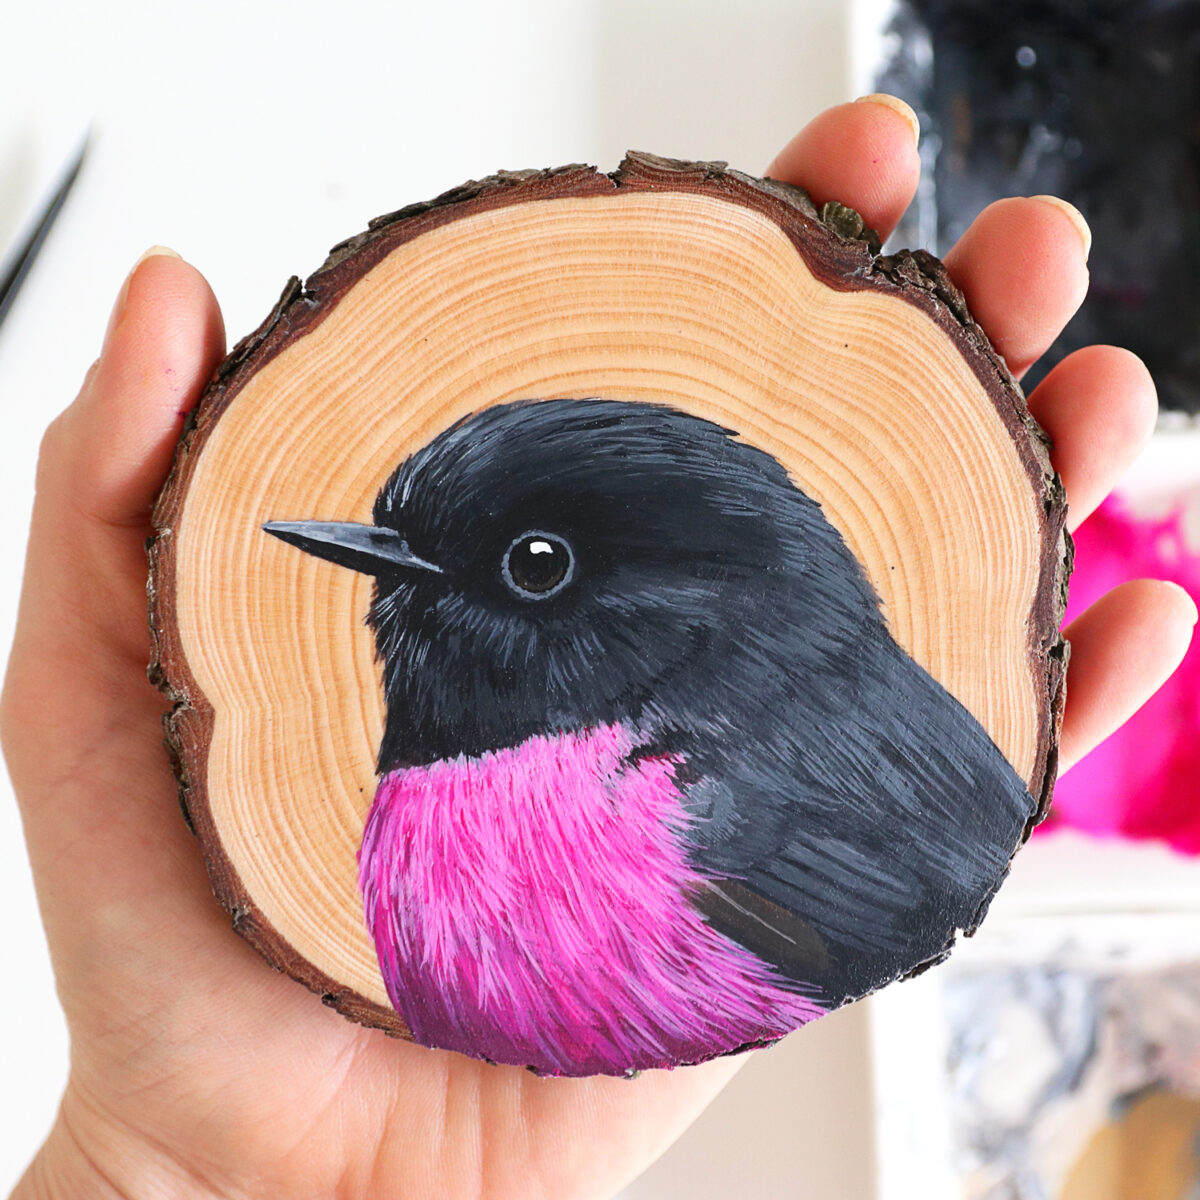 100 Days Of Birds A Marvelous Series Of Gouache On Wood Paintings By Deanna Maree (1)